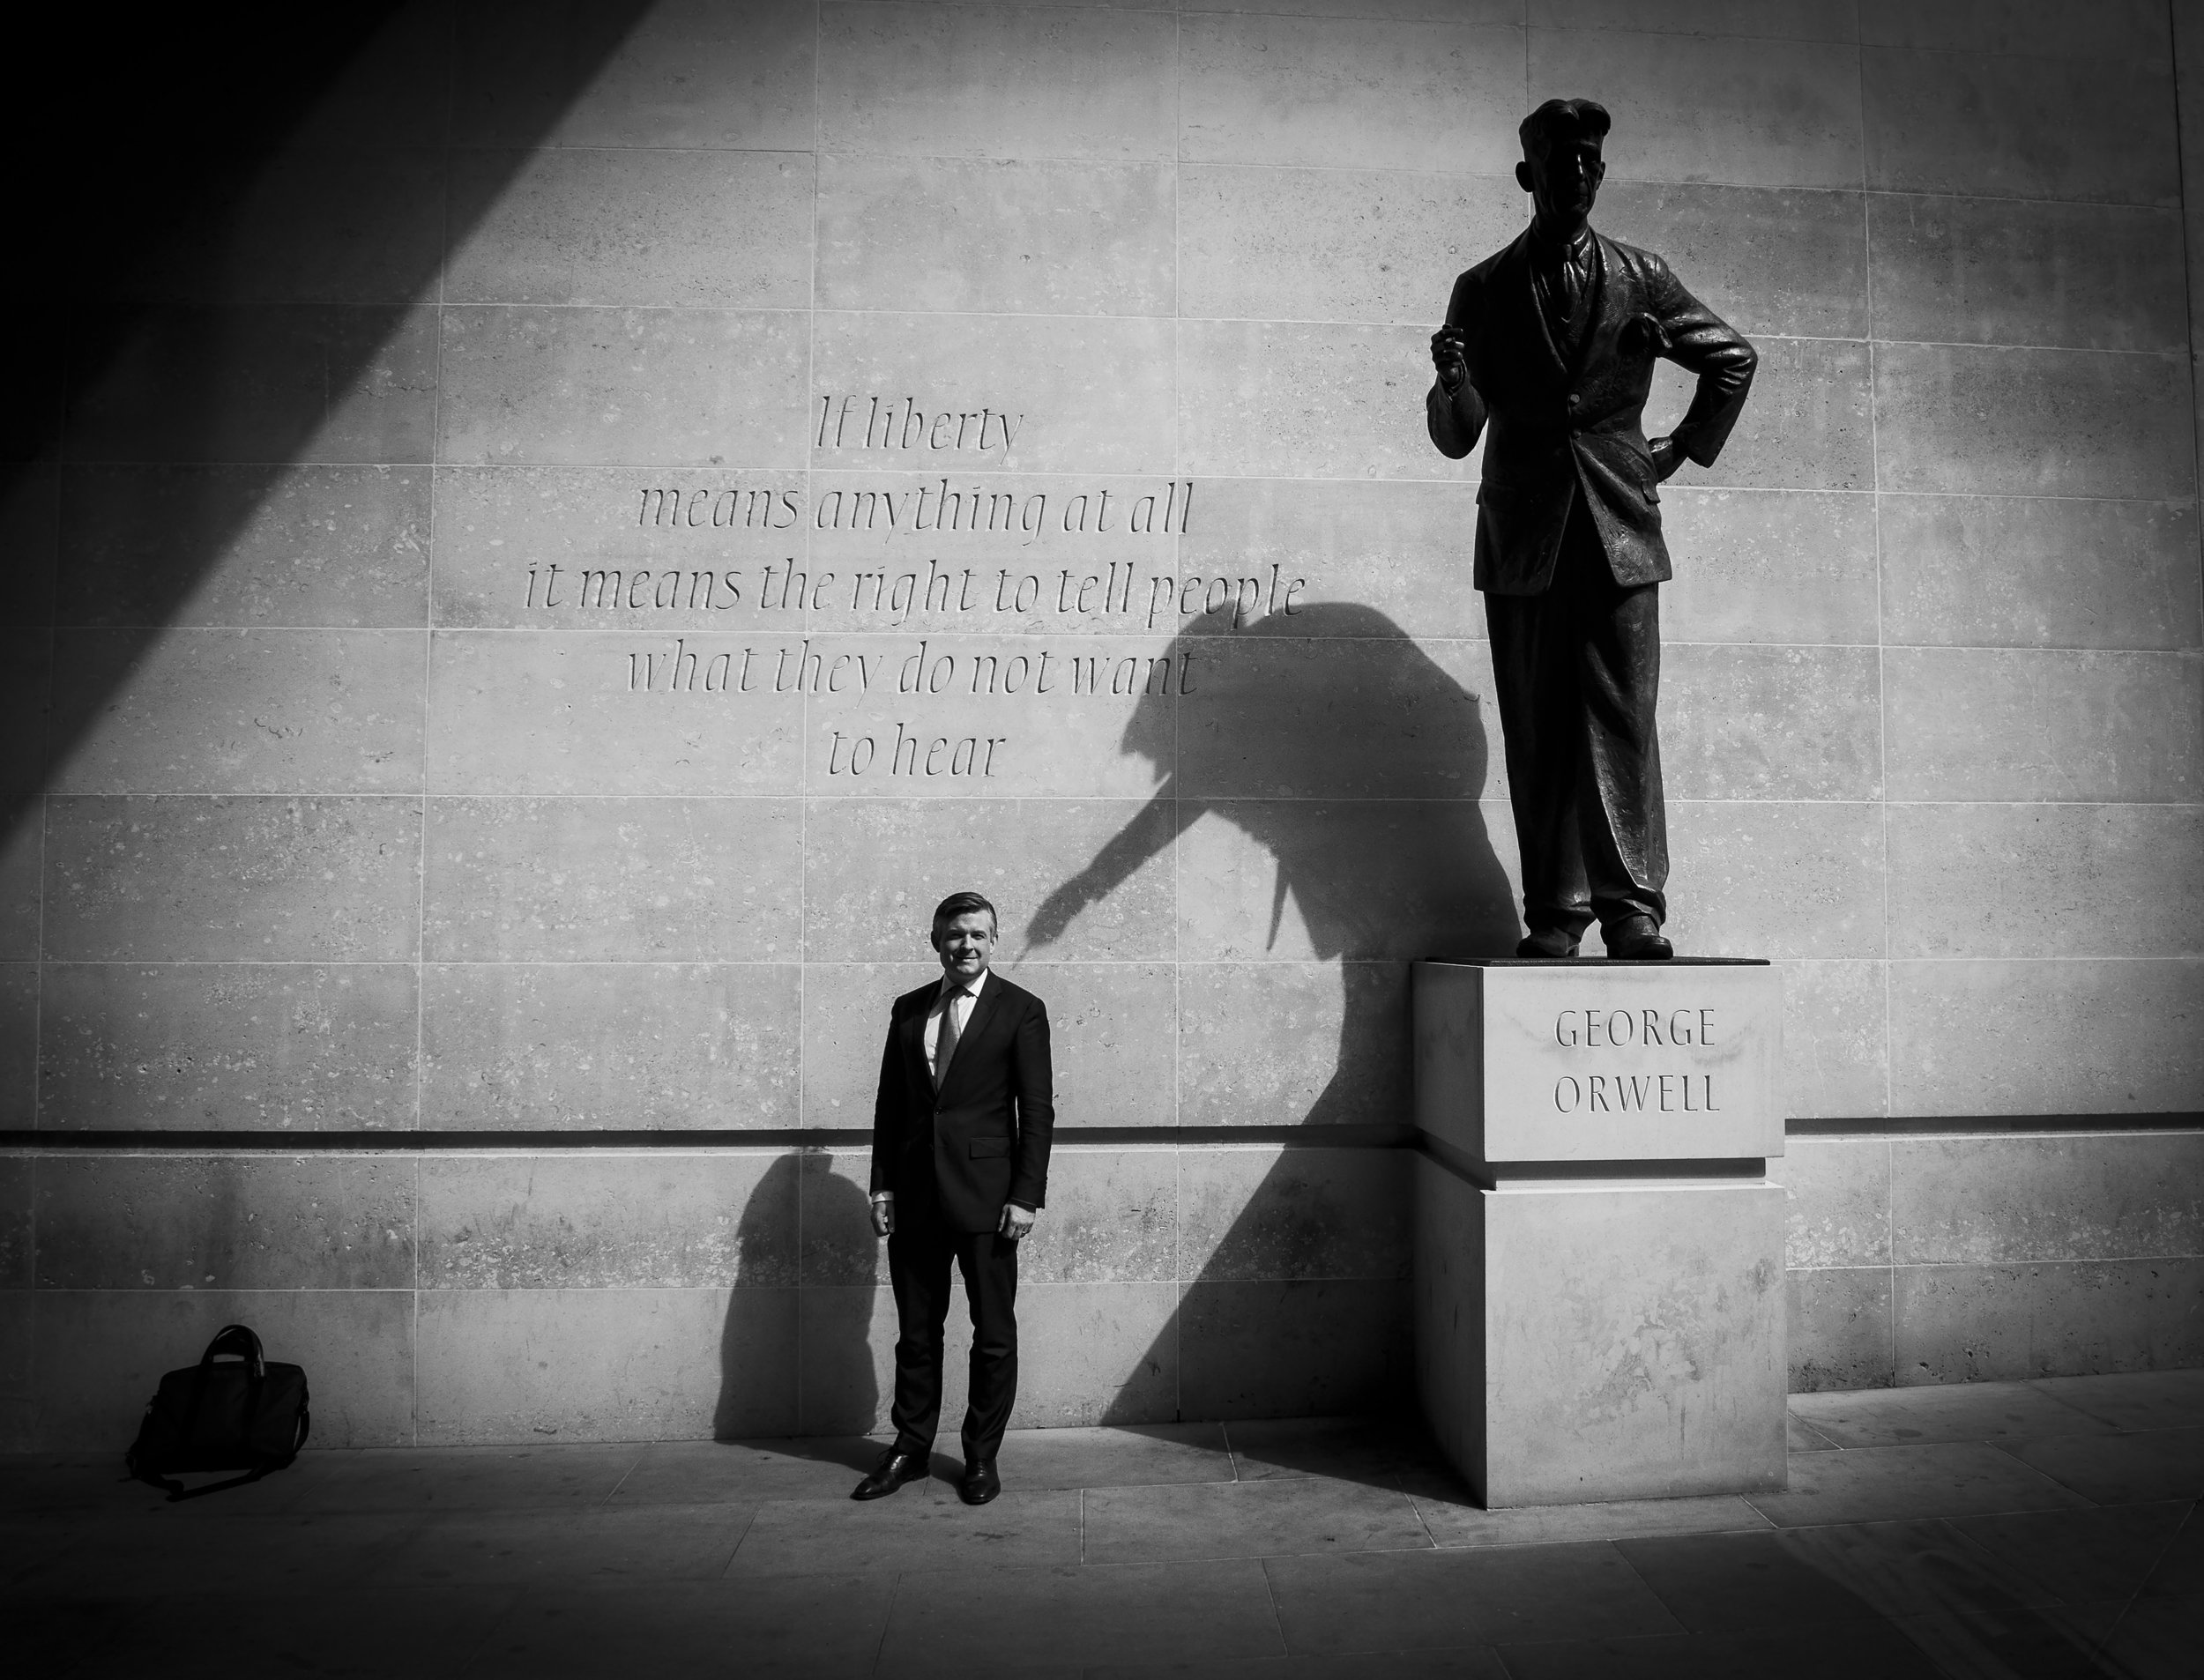  George Orwell�s shadow points at the Shadow Health & Social Care Secretary Jon Ashworth MP as he leaves New Broadcasting House after appearing on The Andrew Marr Show.
Photo by Elliott Franks, 27 May 2018
 